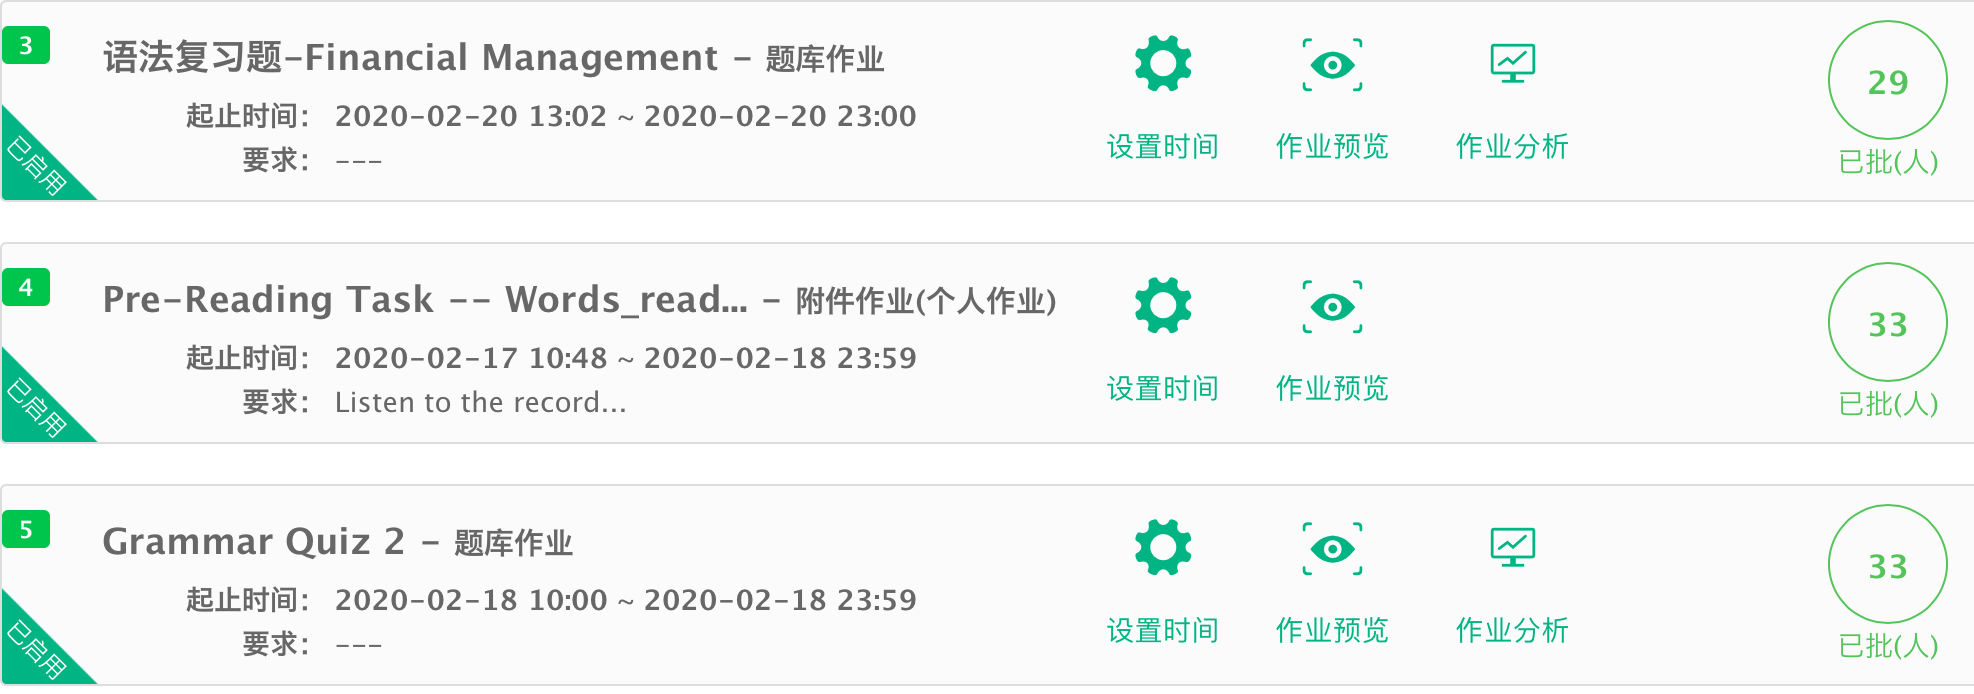 ../../../lll/Library/Containers/com.tencent.qq/Data/Library/Application%20Support/QQ/Users/276168660/QQ/Temp.db/F8674014-F7BE-4430-94C2-2CAC384964BC